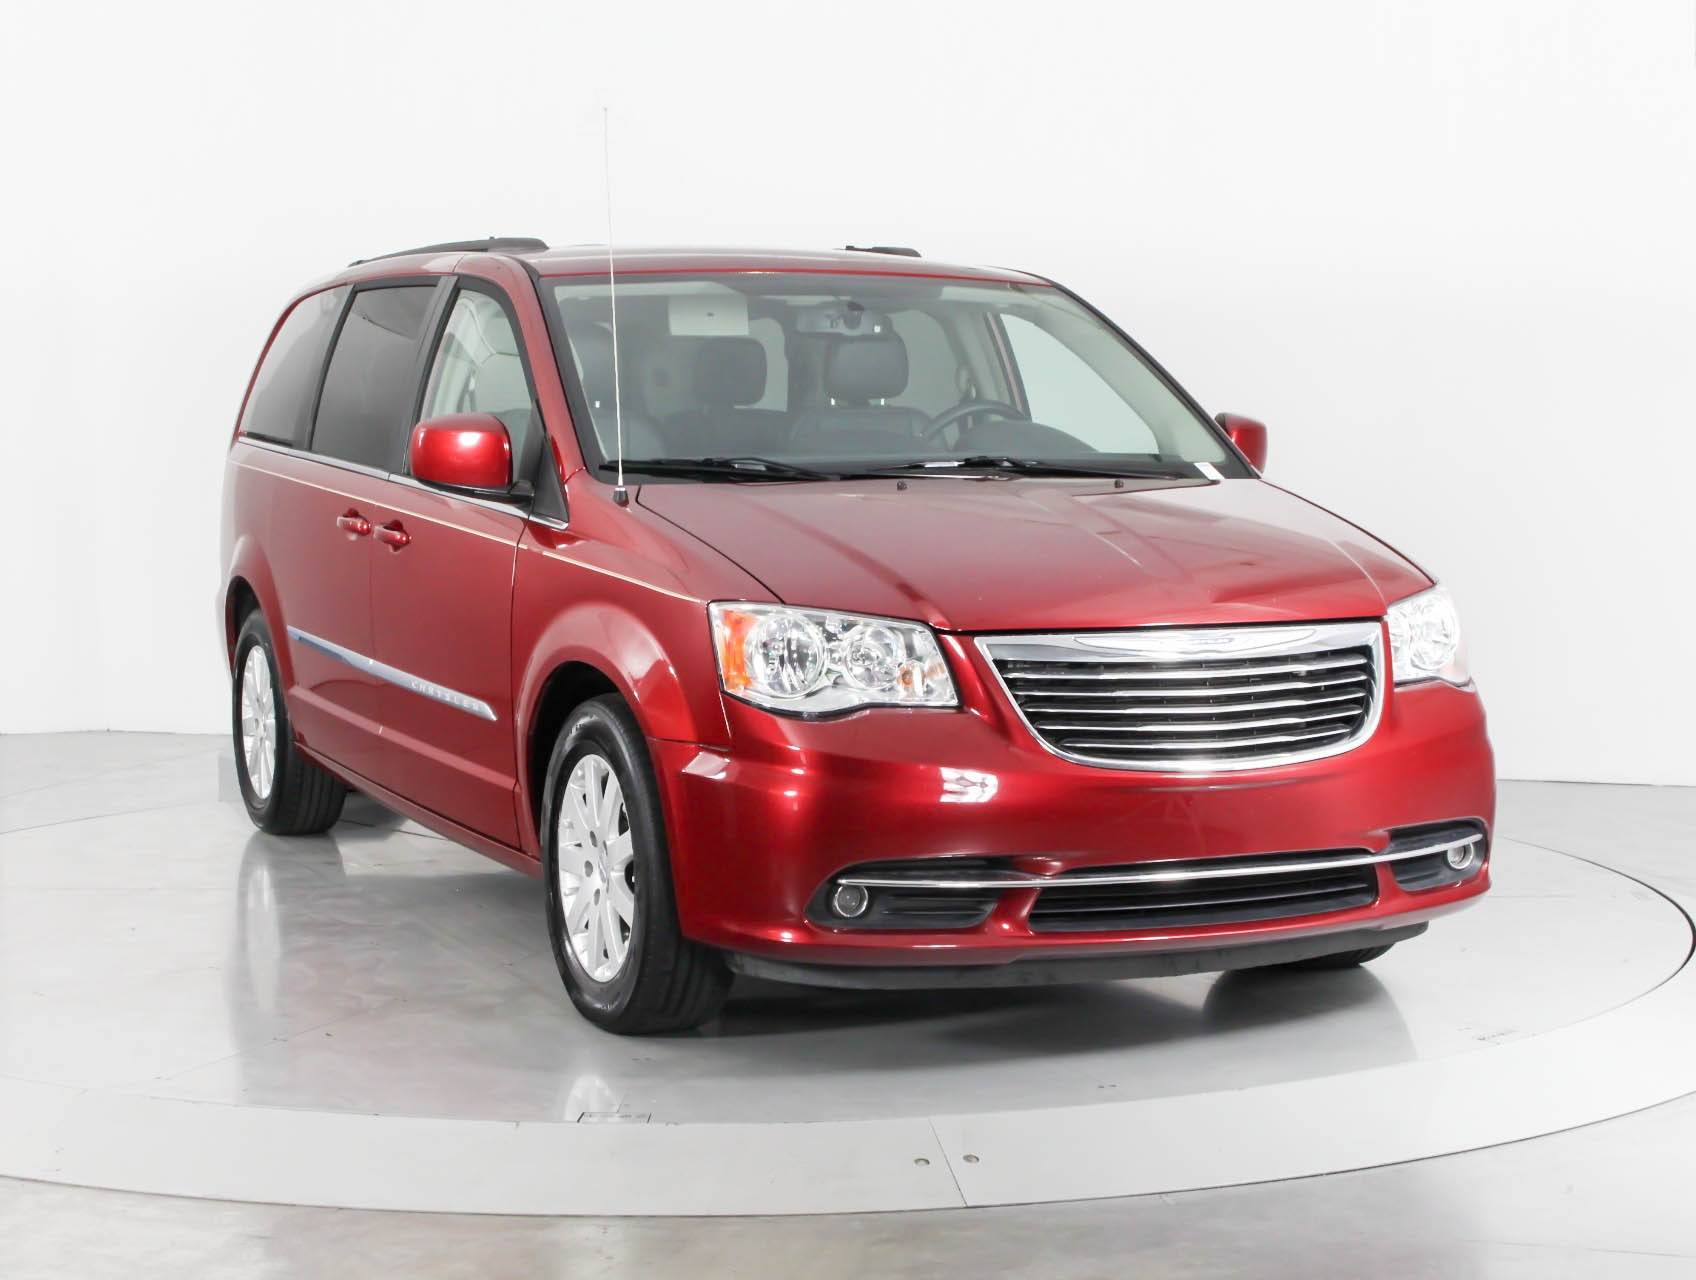 Florida Fine Cars - Used CHRYSLER TOWN & COUNTRY 2015 WEST PALM TOURING